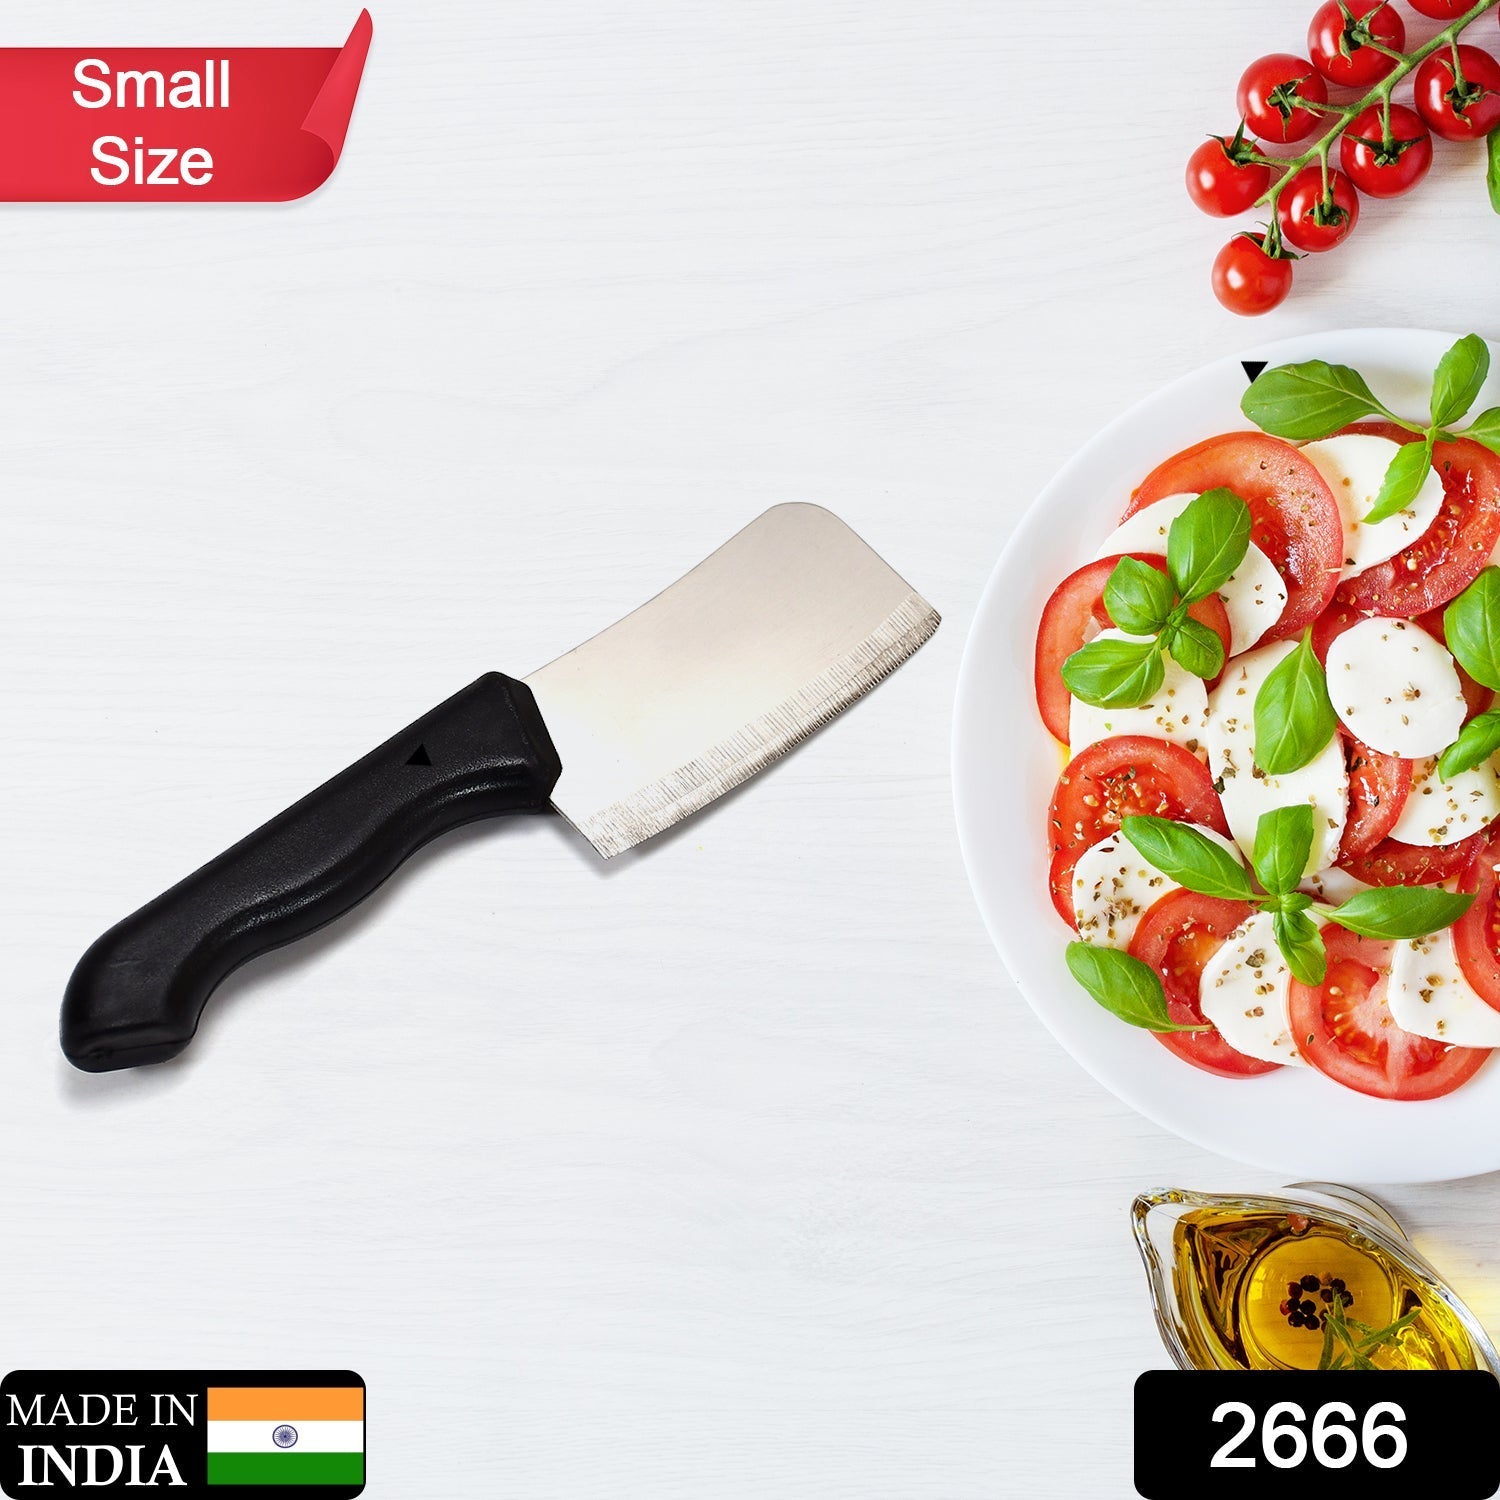 2666 Small Stainless Steel knife and Kitchen Knife with Black Grip Handle. DeoDap